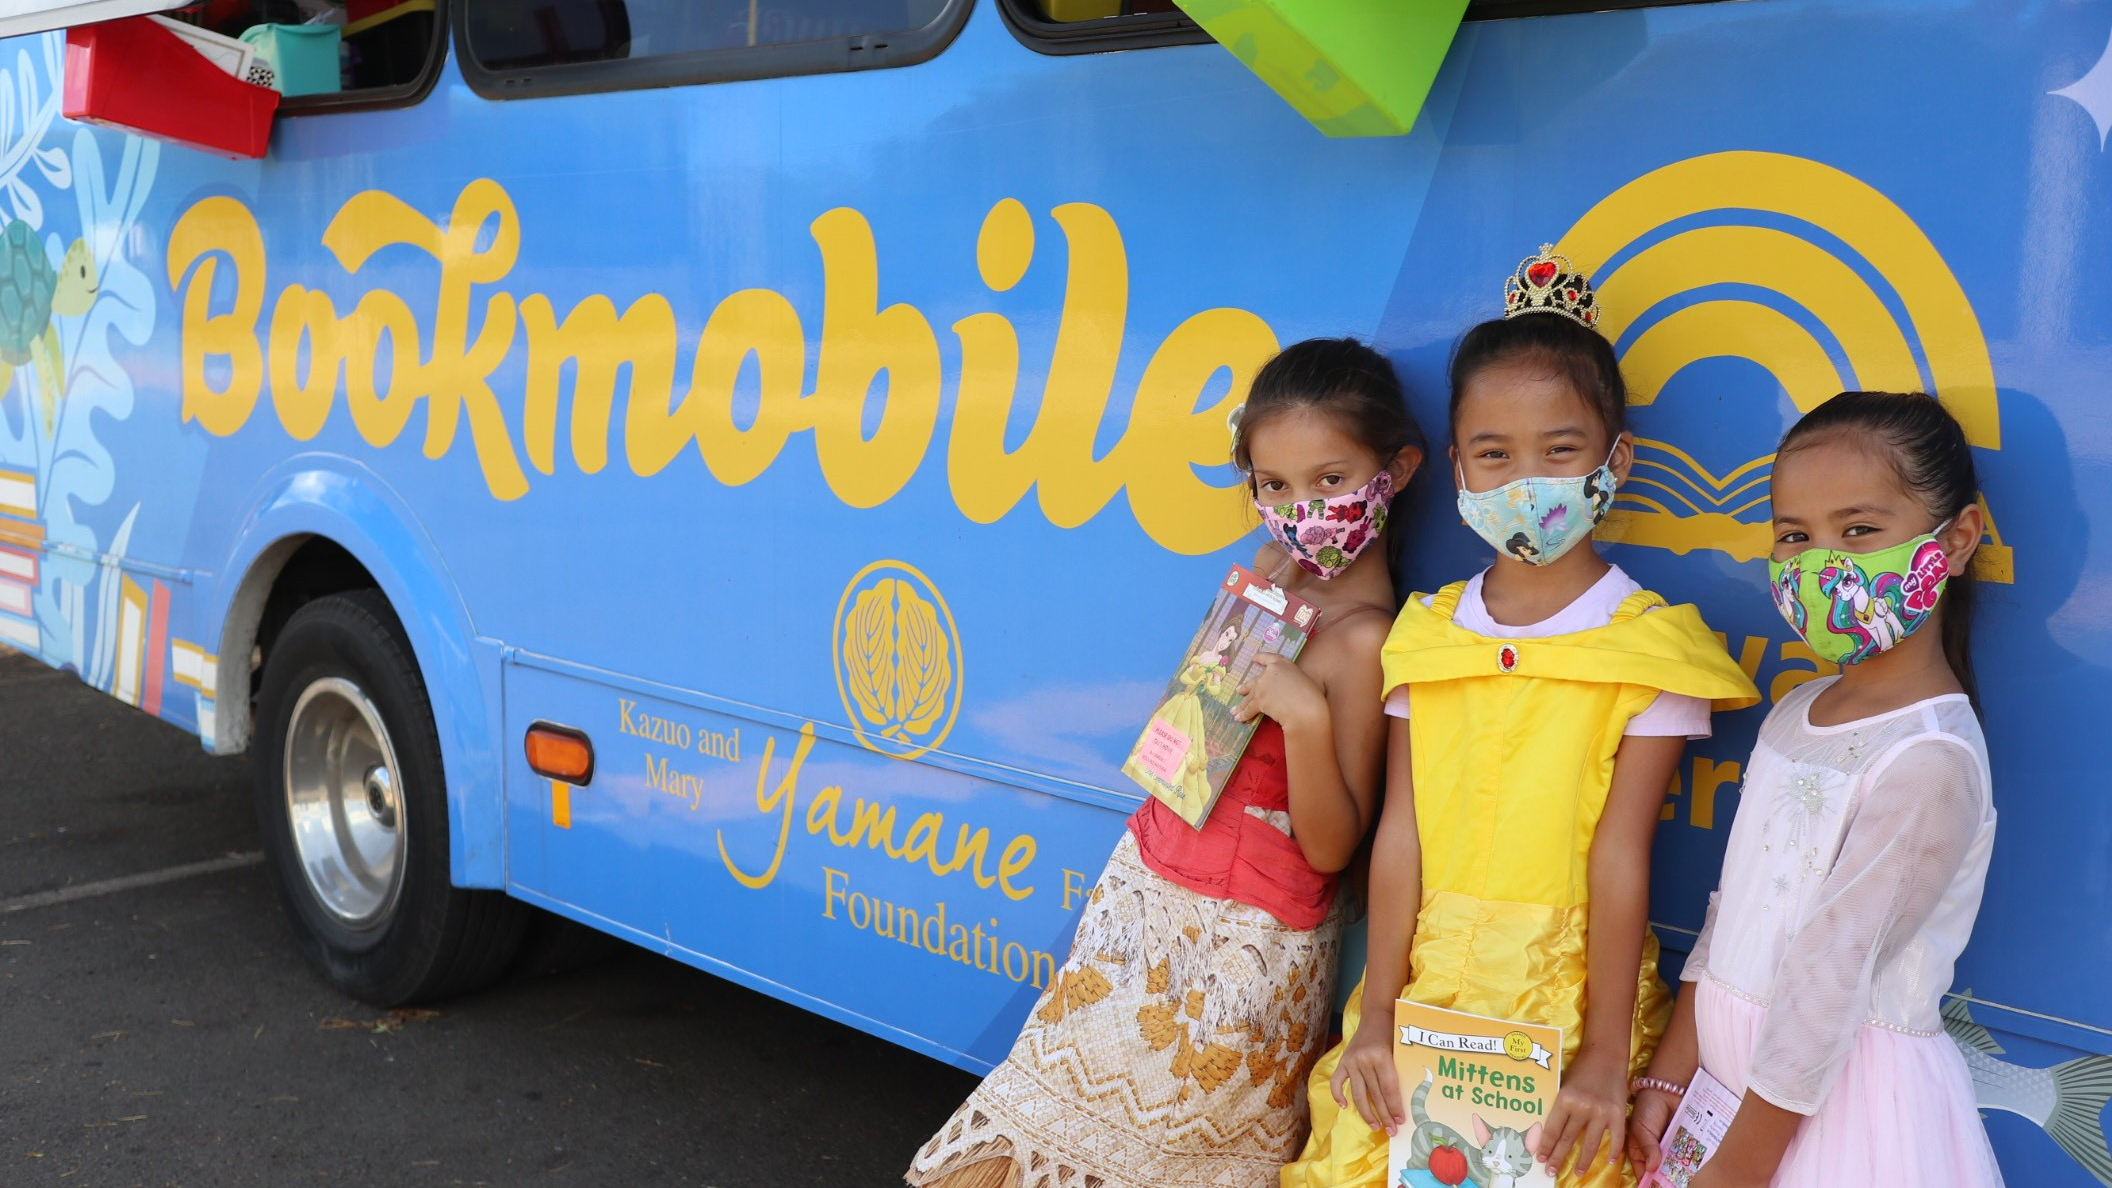 three girls dressed in Disney princess costumes stand against the blue Bookmobile bus and hold books in their hands